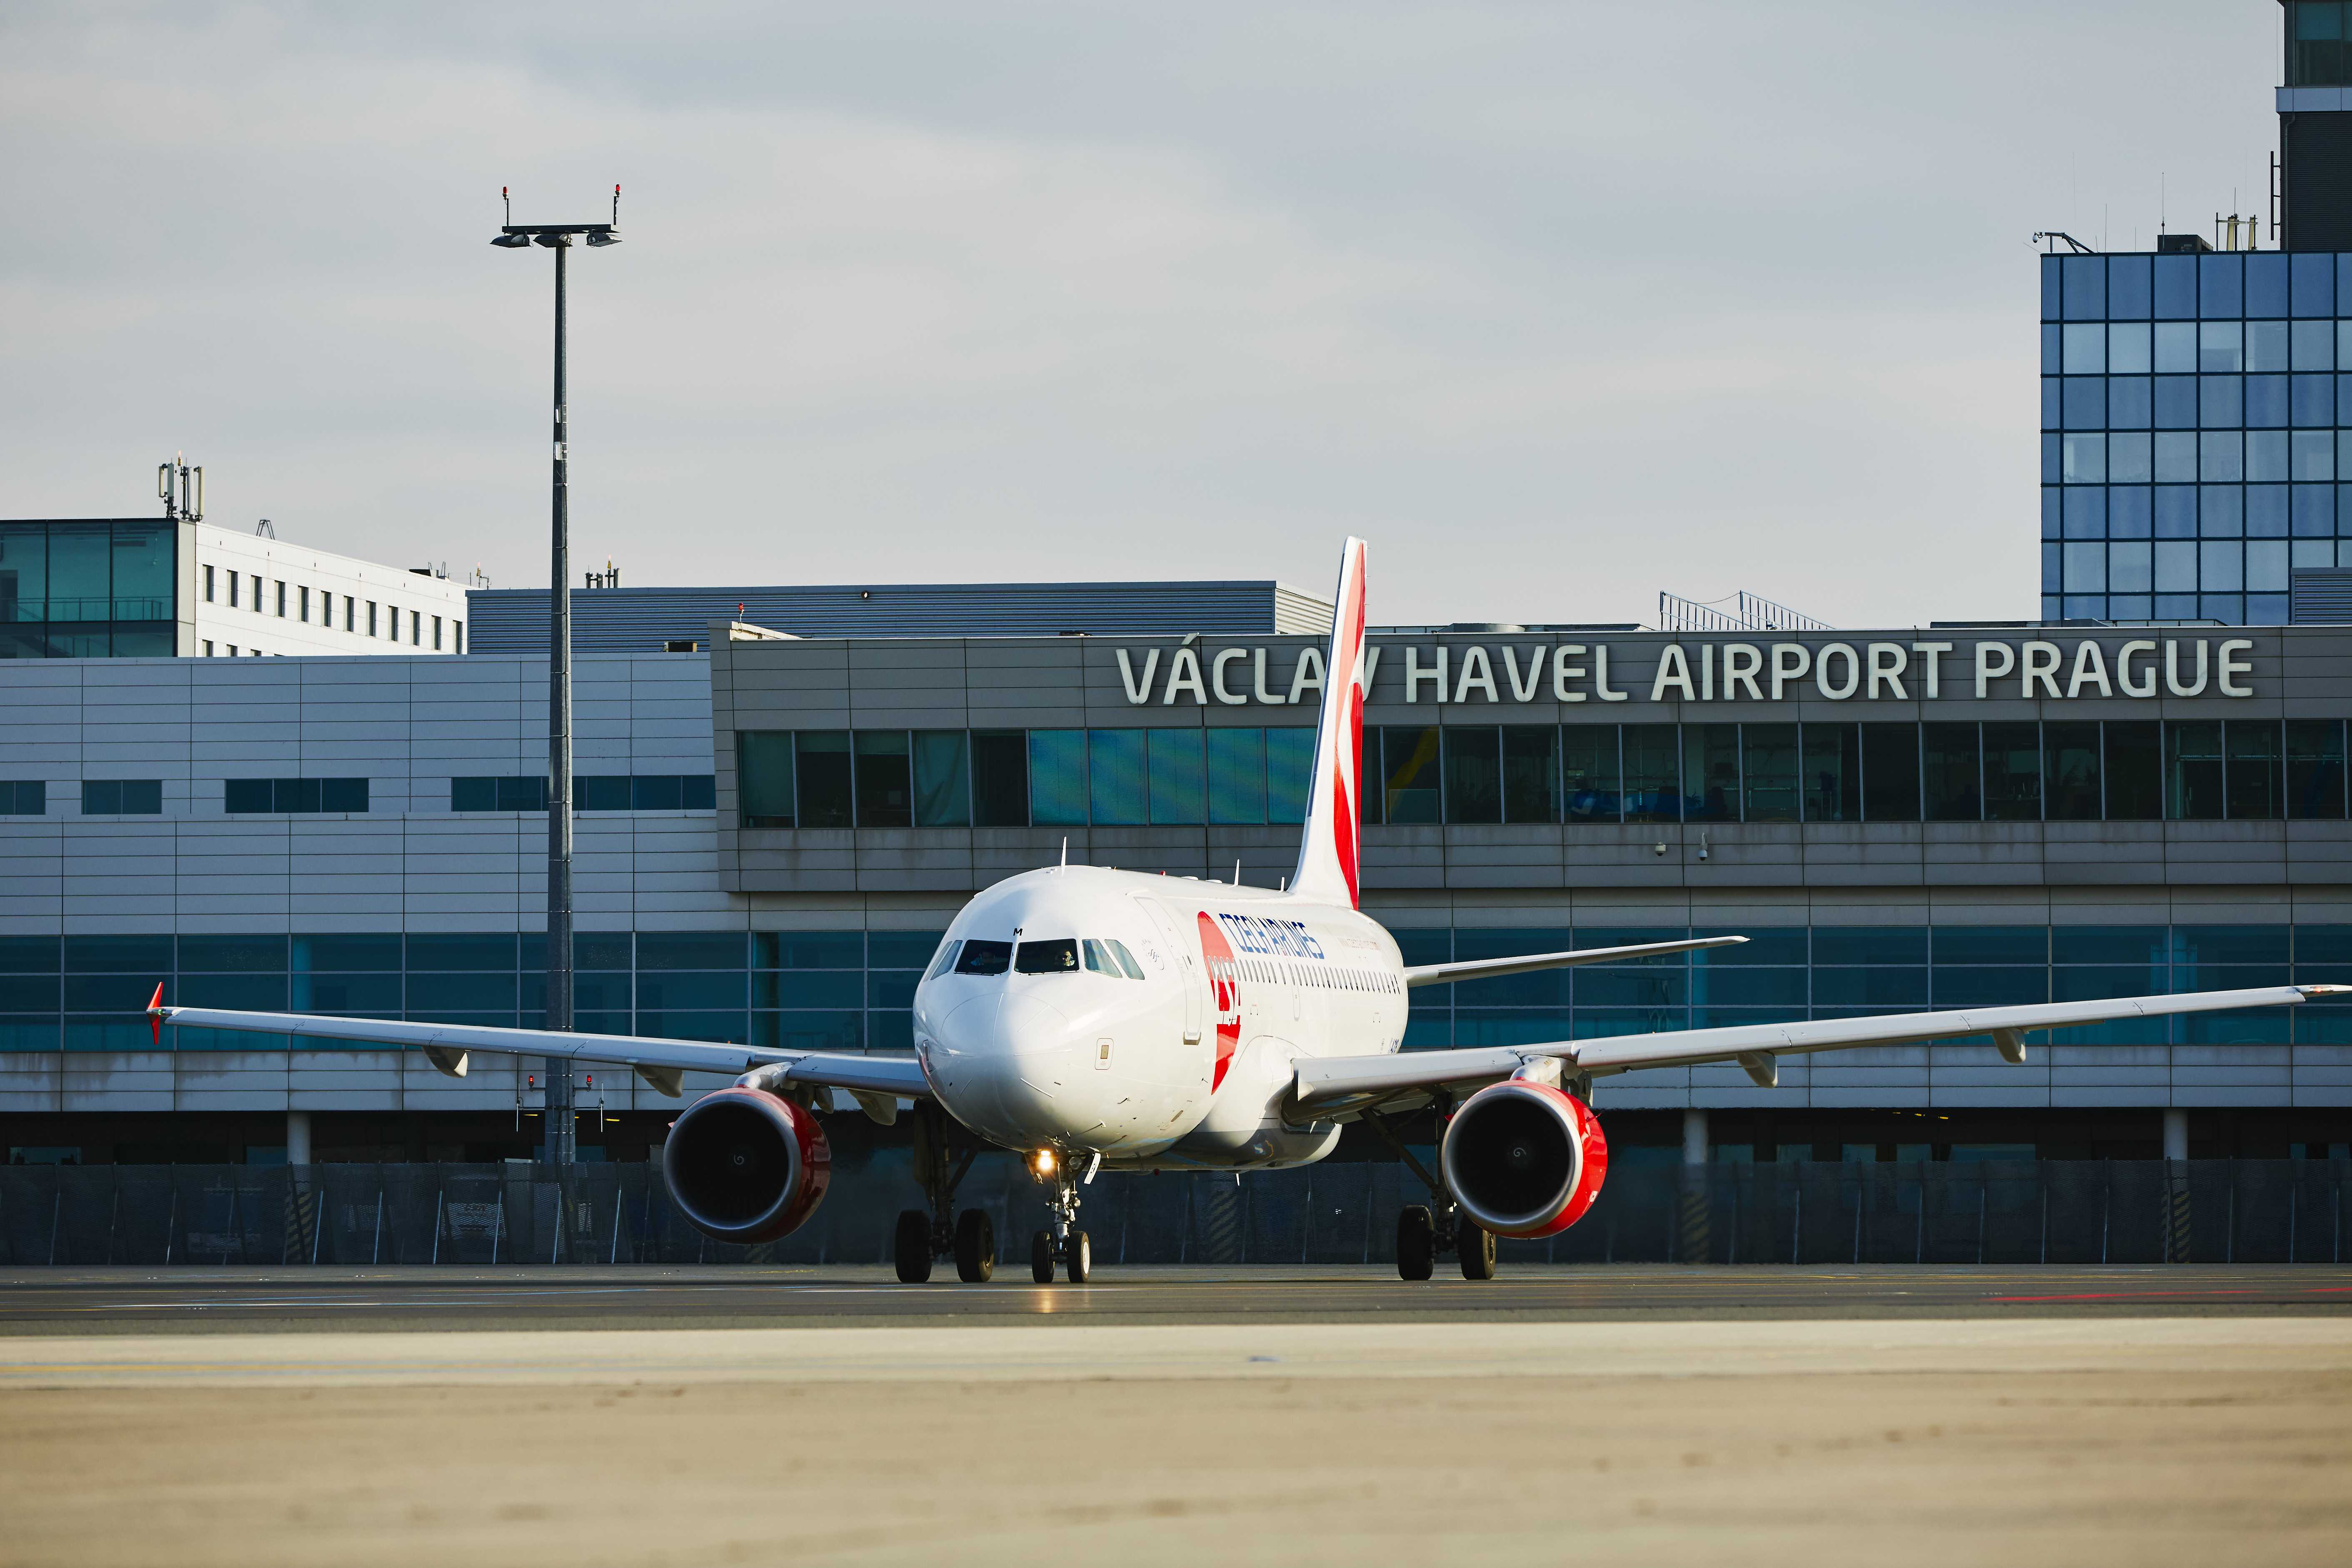 Airbus A319 of Czech Airlines at Vaclav Havel Prague Airport in the Czech Republic in December 21, 2014.